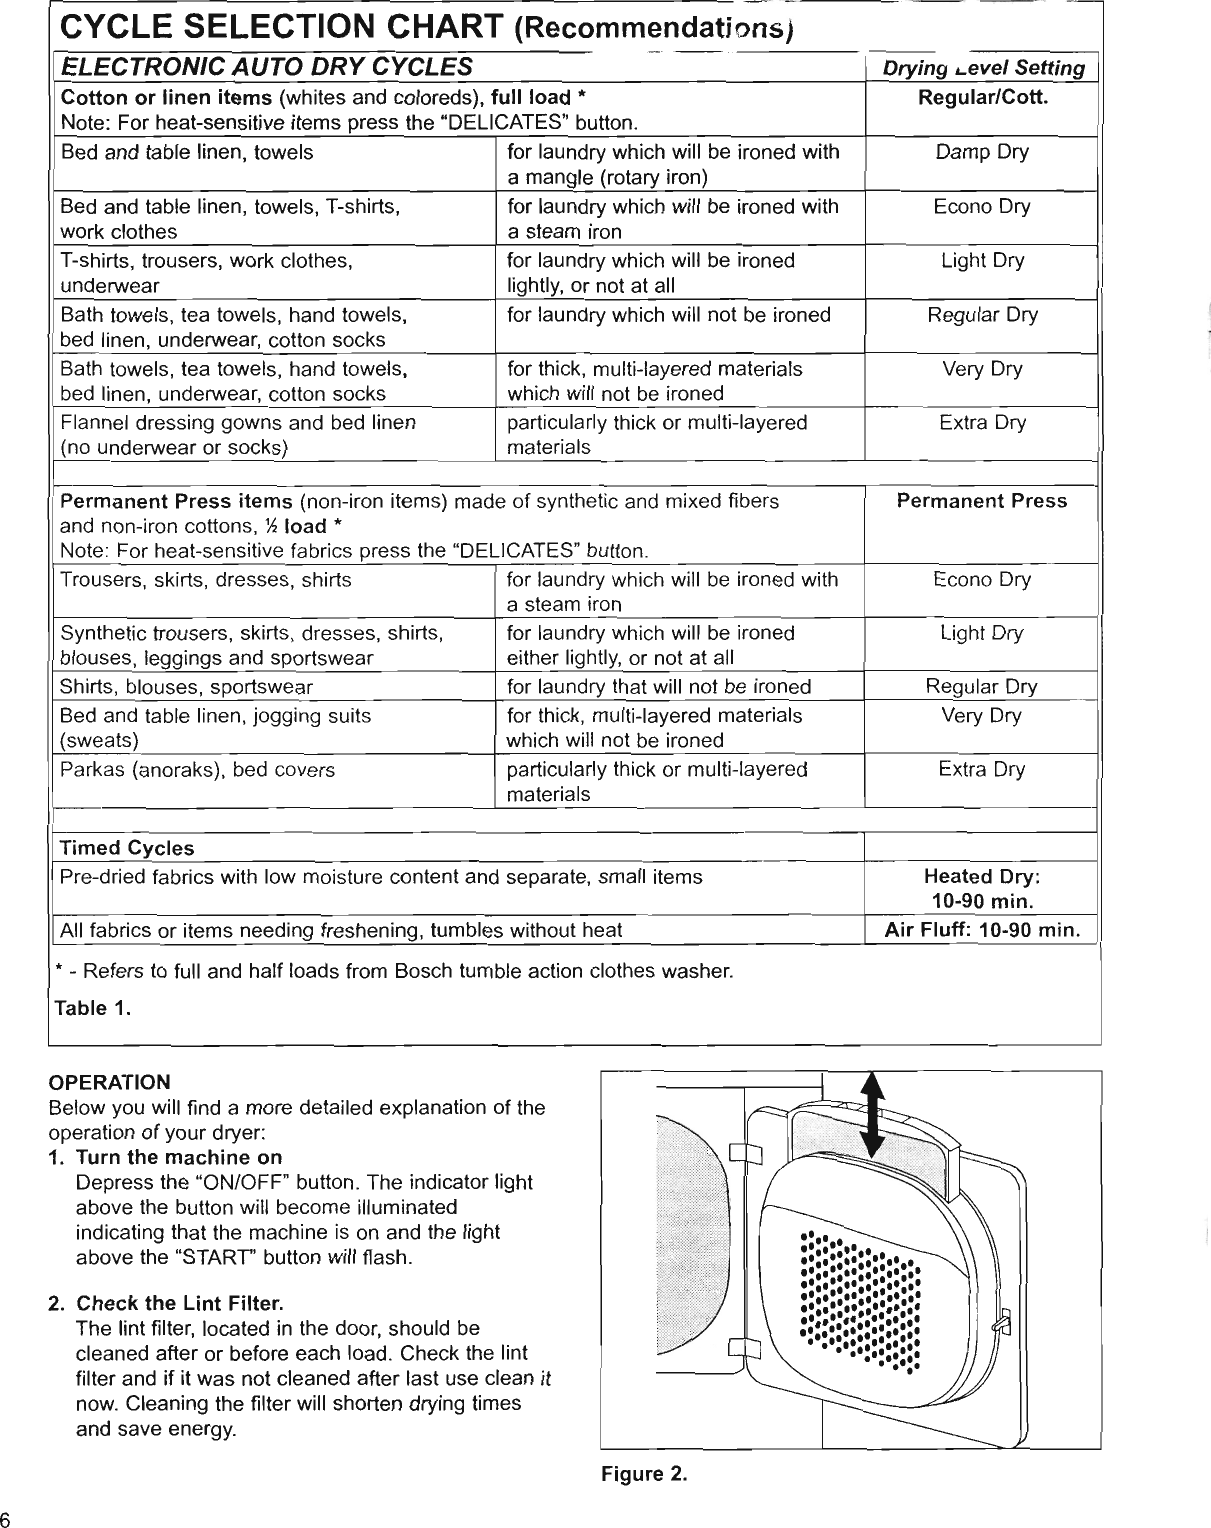 Page 6 of 12 - Boschhome Boschhome-Bosch-Appliances-Clothes-Dryer-Wta-3500-Users-Manual- Use & Care Manual For Bosch WTA 3500 And WTL 5400 Dryers  Boschhome-bosch-appliances-clothes-dryer-wta-3500-users-manual